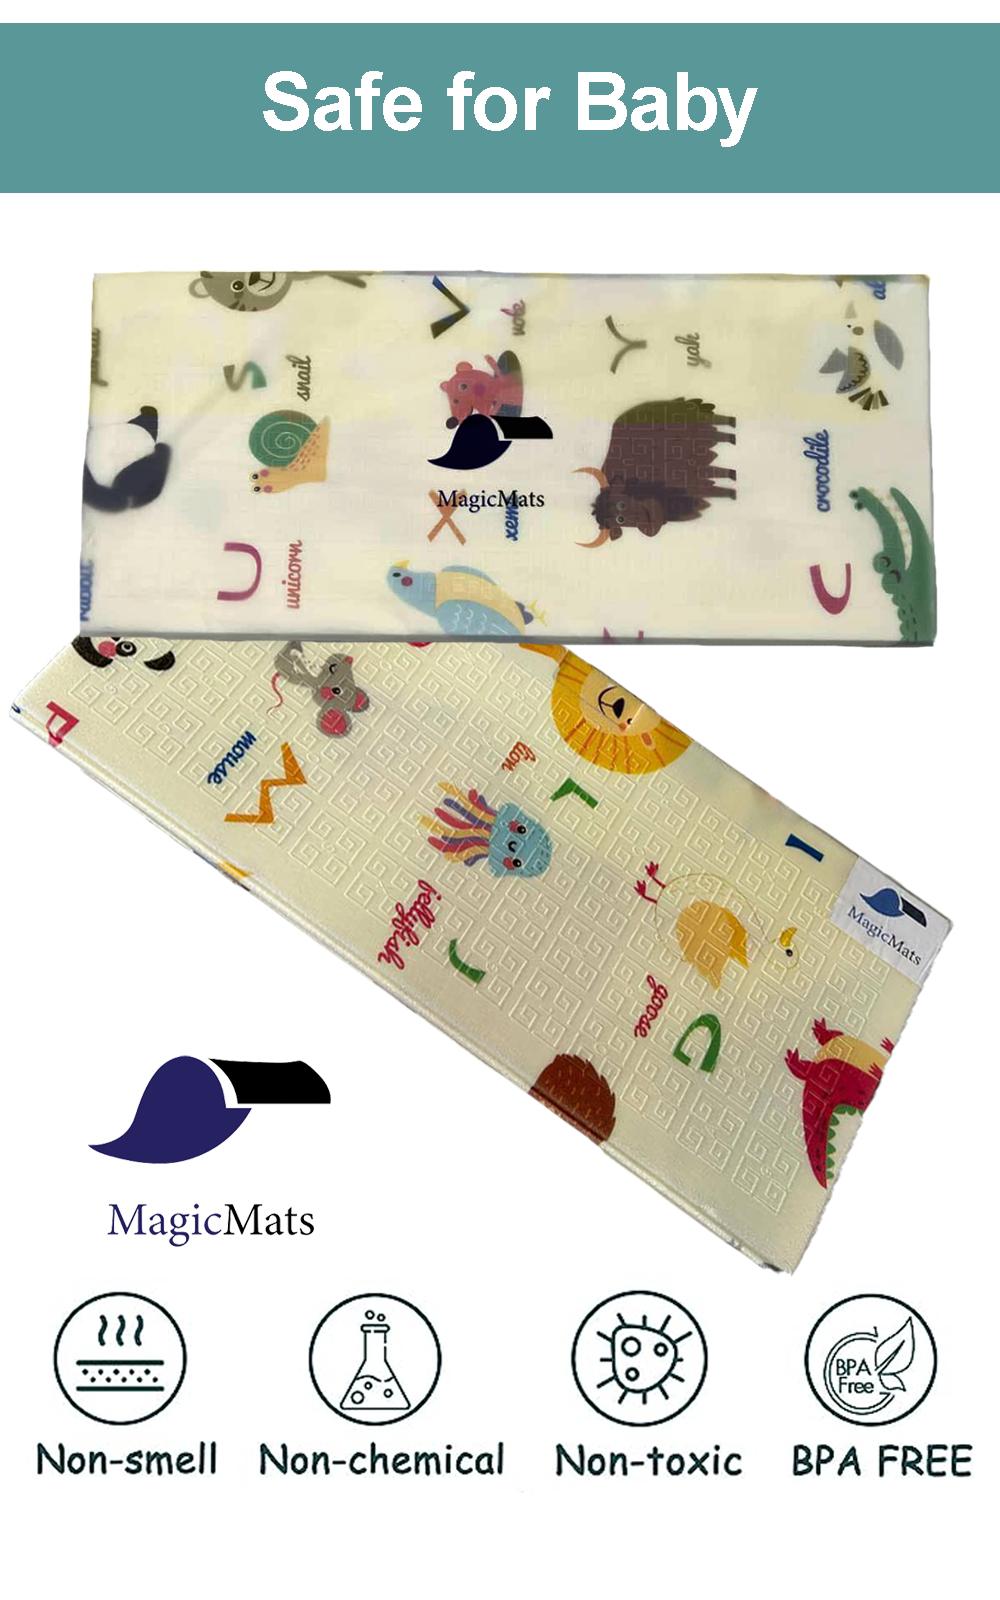 MagicMats Premium Baby Play Mat - Safe, Soft, and Stimulating , Perfect Playtime Fun, Soft and Safe Infant Playmat for Tummy Time and Developmental Fun.